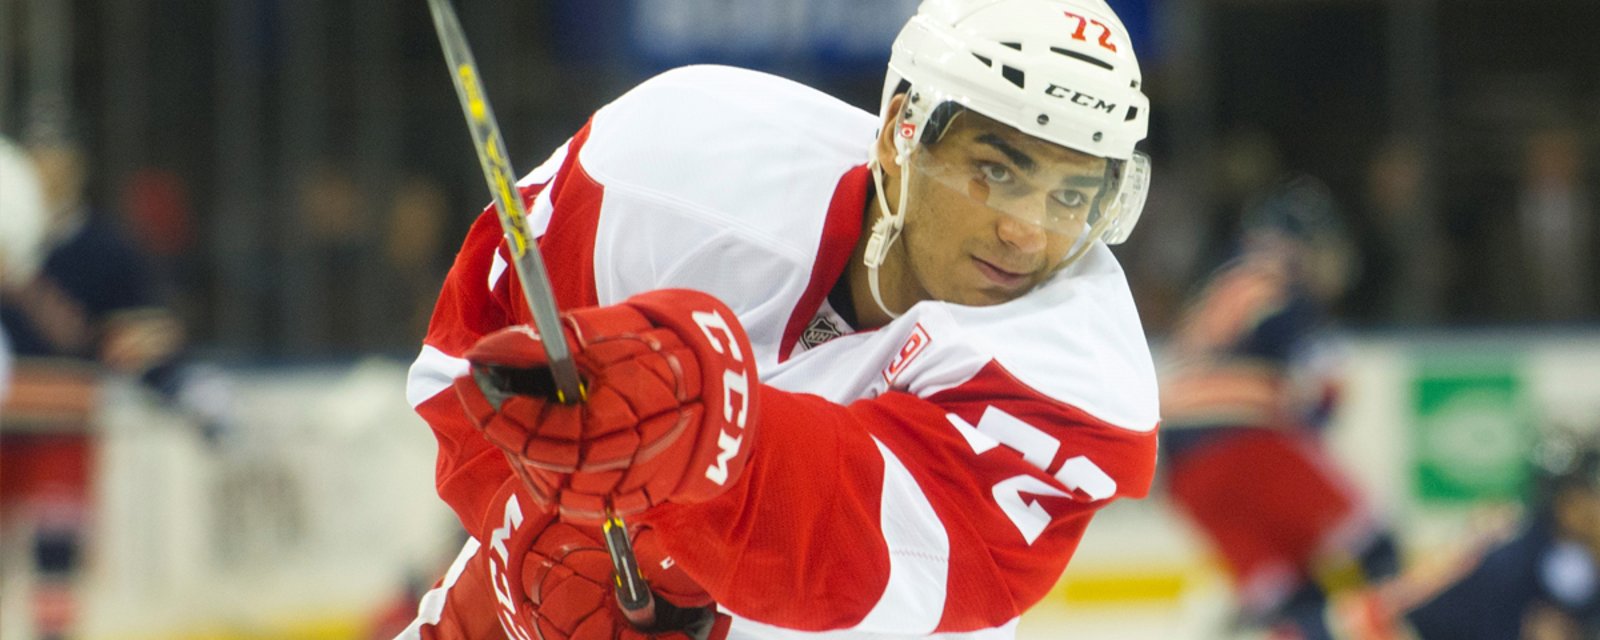 Breaking: Athanasiou sets deadline to make decision on his future